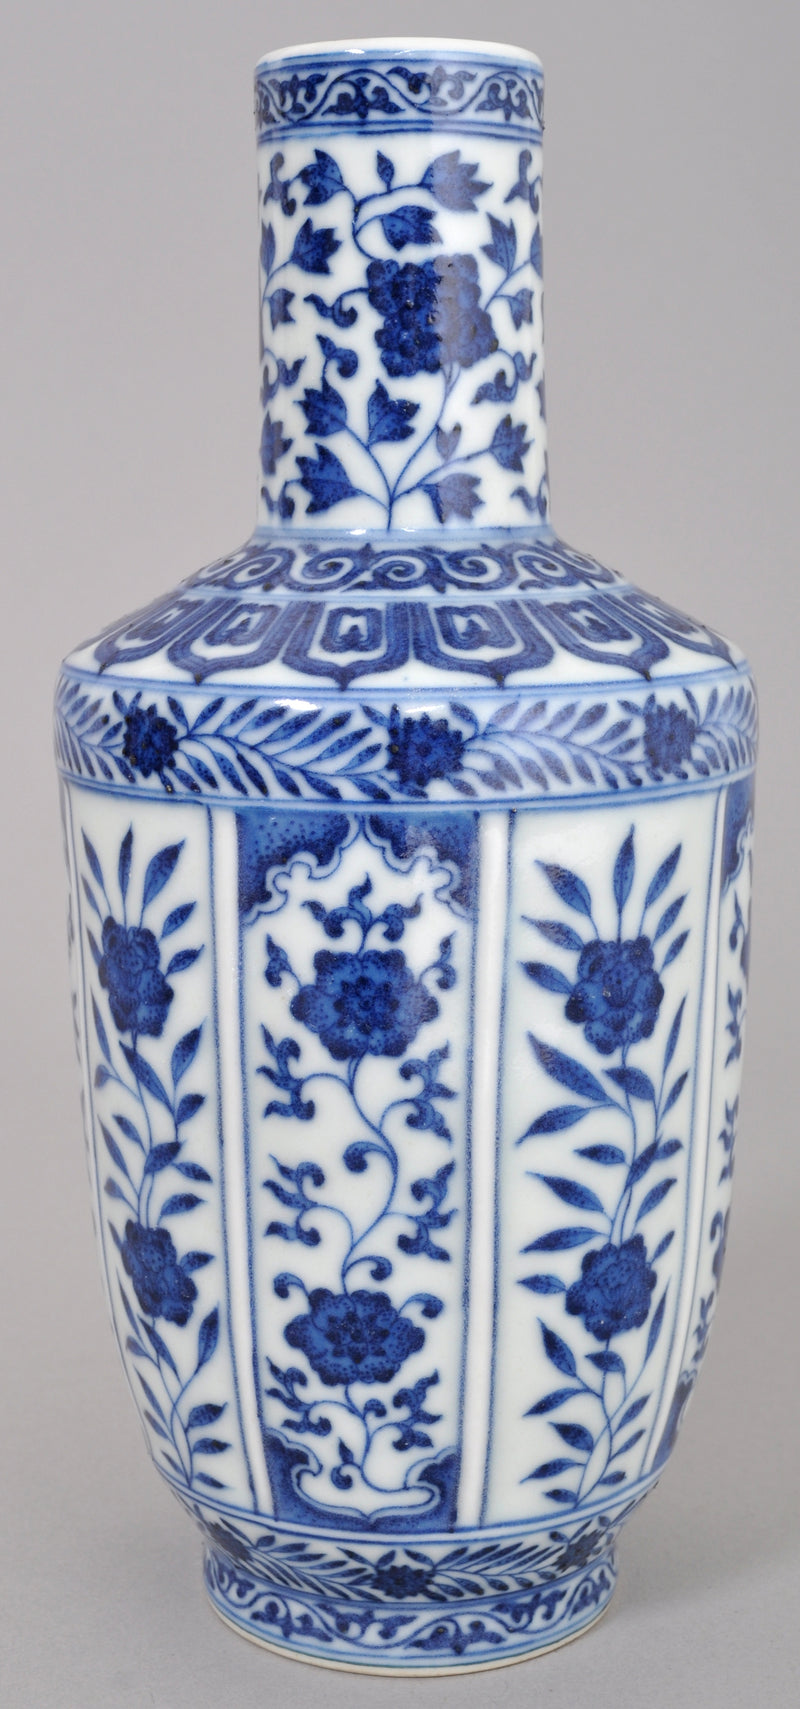 Antique 19th Century Chinese Blue and White Porcelain 'Sleeve' Vase, Circa 1850